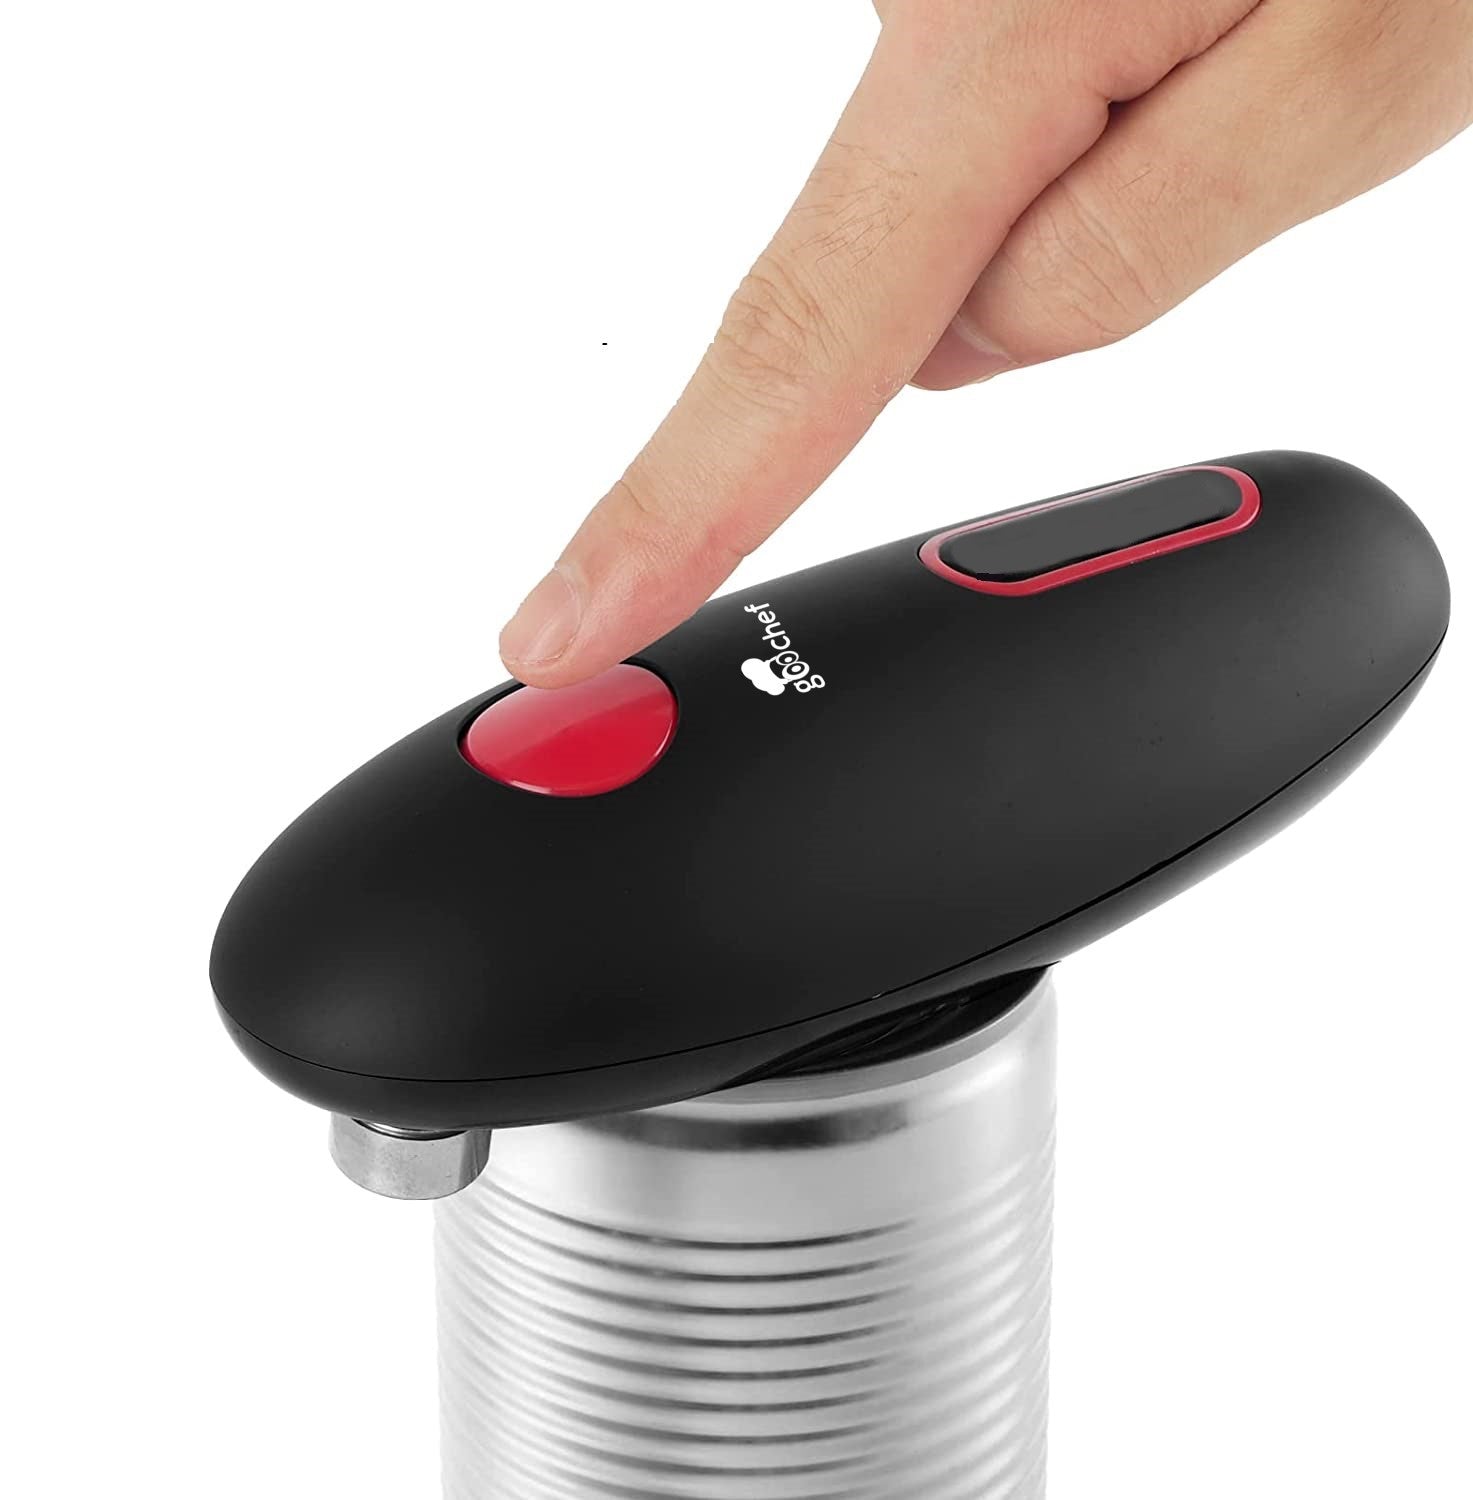 Dropship Kitchen Electric Can Opener: Open Your Cans With A Simple Push Of  Button - Smooth Edge, Food-Safe And Battery Operated Handheld Can Opener  With Manual Can Opener to Sell Online at